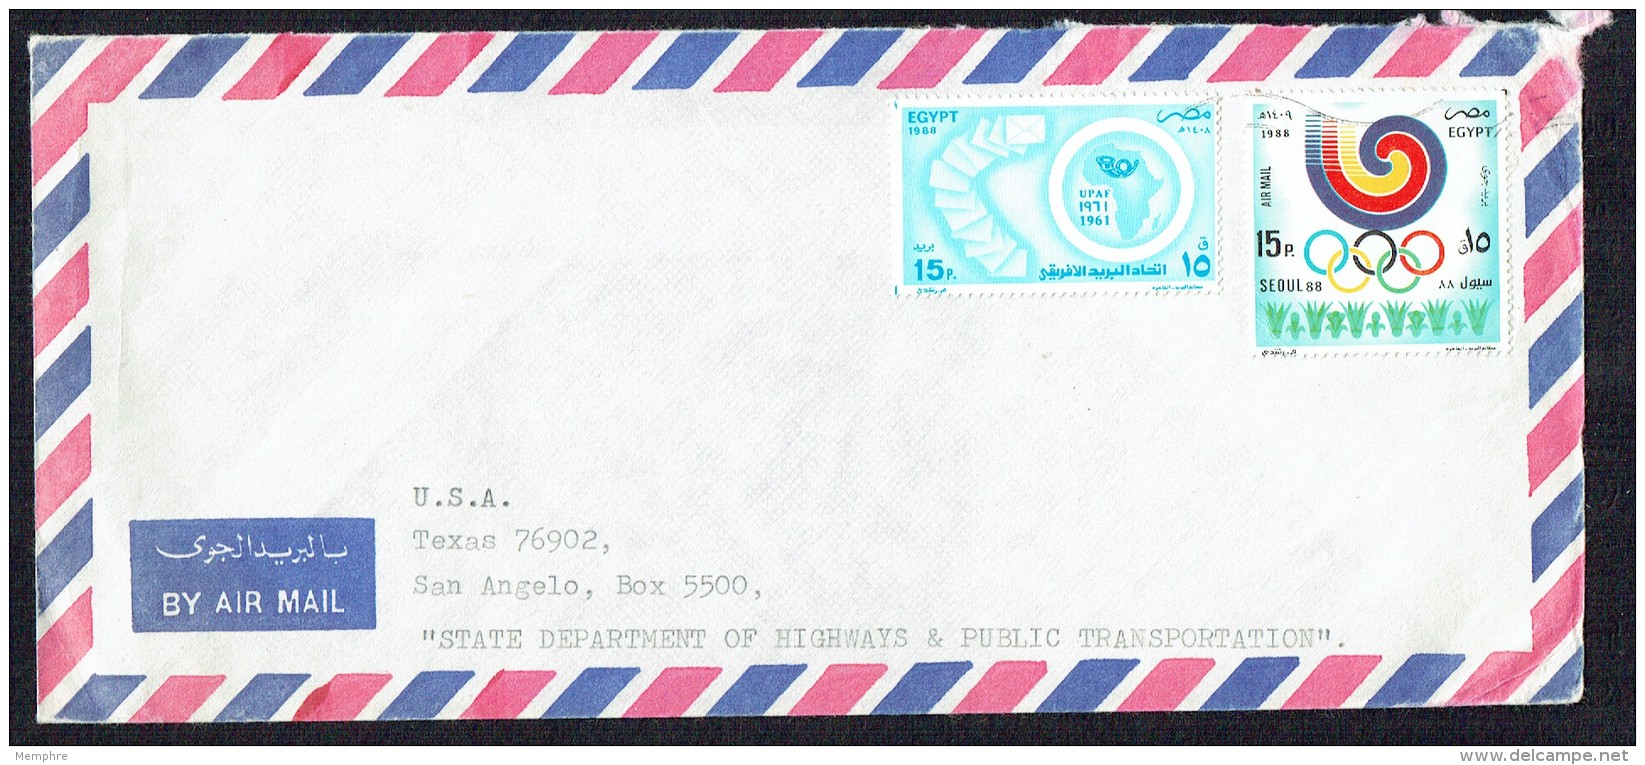 Air Letter To USA  African Postal Union, Seoul Olympic Games - Covers & Documents